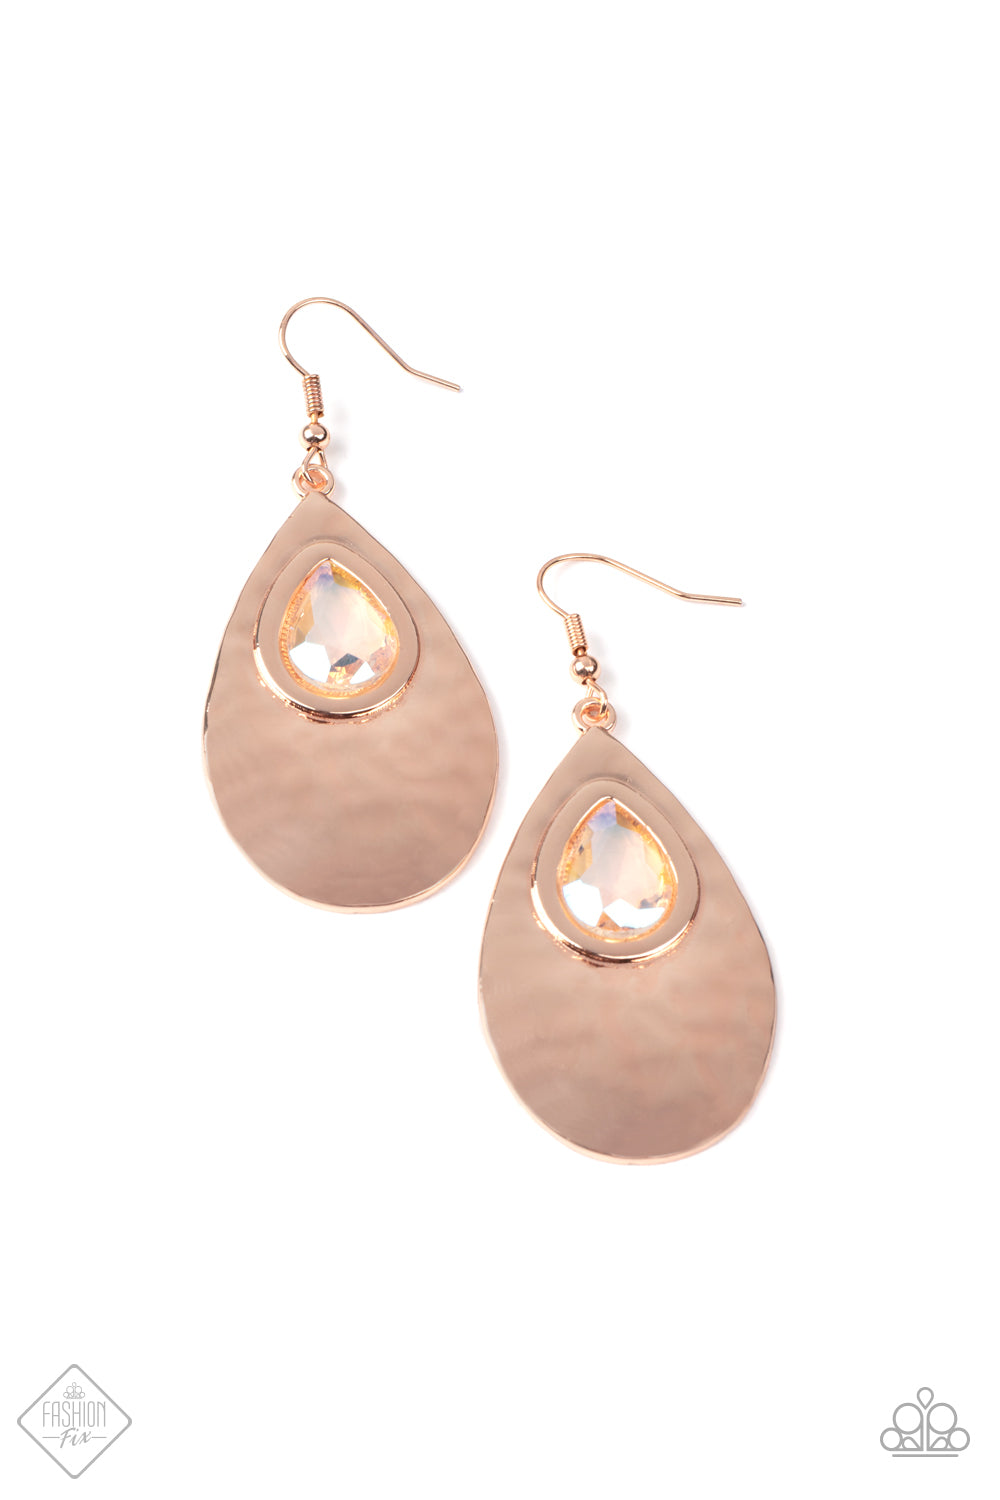 Tranquil Trove - Rose Gold Earrings shiny rose gold teardrop is hammered in texture, creating a radiant display as the light bounces off each beveled surface. A faceted iridescent teardrop gem with Pale Rosette undertones is pressed into the top of the rose gold frame in an enchanting finish. Earring attaches to a standard fishhook fitting.  Sold as one pair of earrings.  Paparazzi Jewelry is lead and nickel free so it's perfect for sensitive skin too!